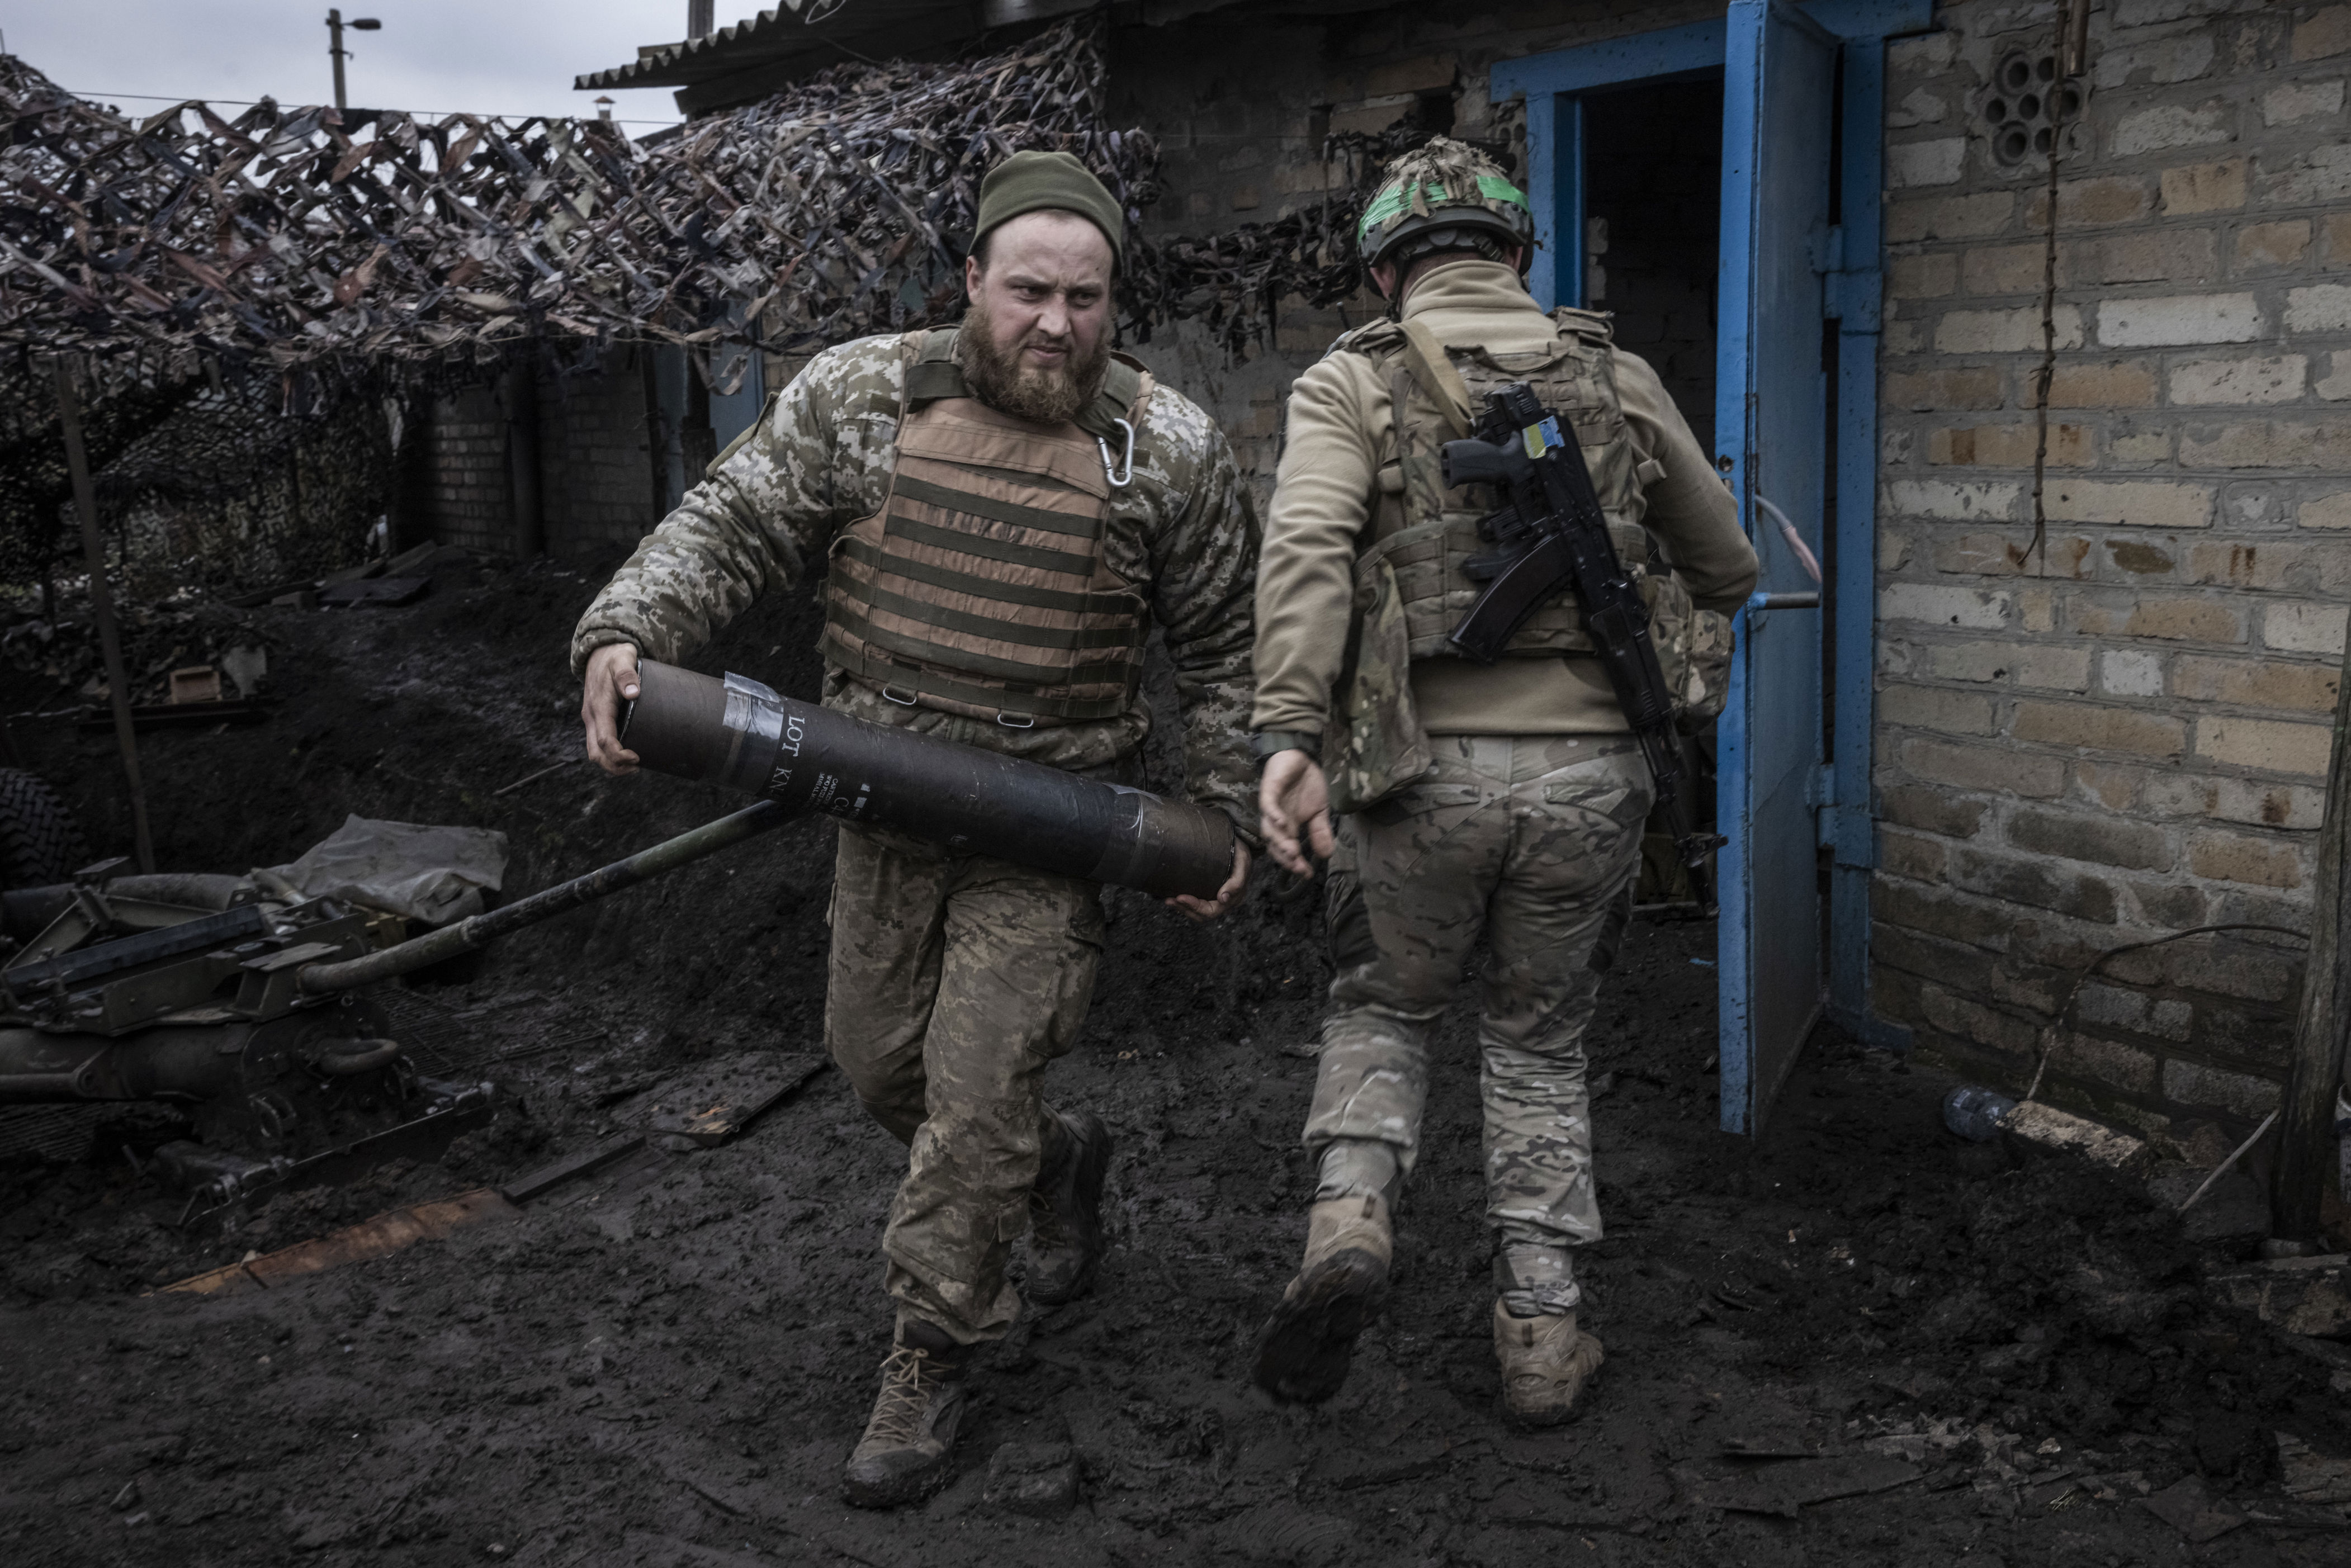 with u.s. aid in doubt, europe struggles to rearm ukraine